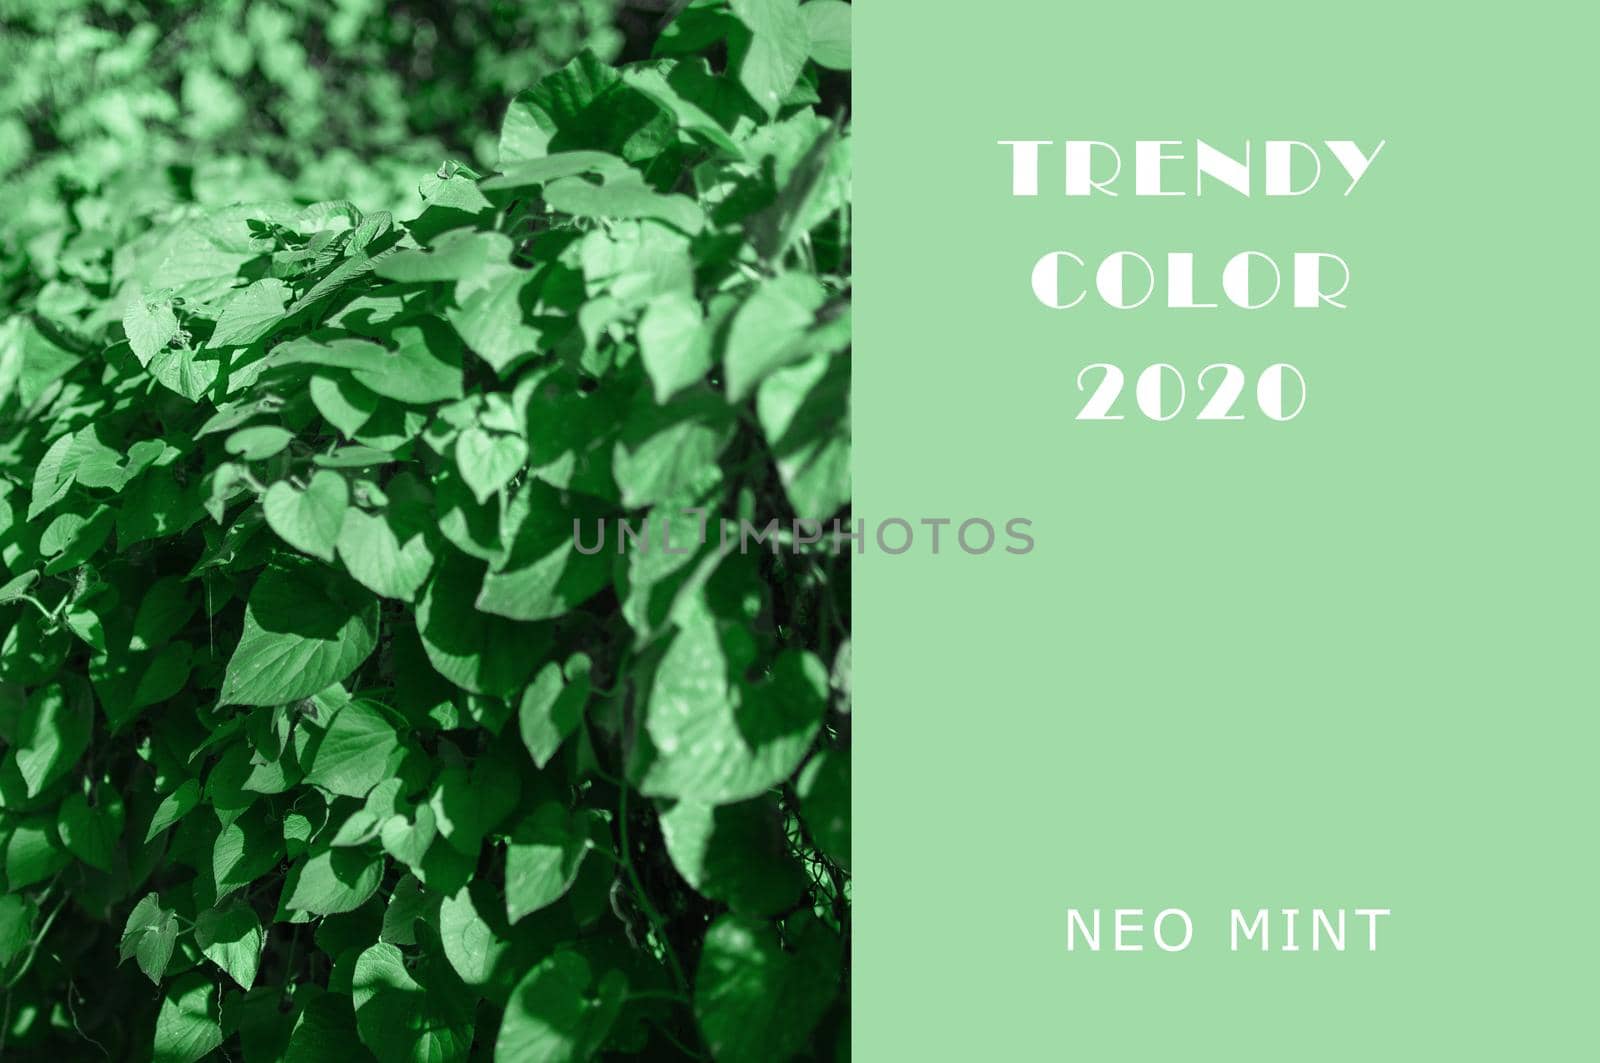 Ivy plant in Neo Mint color. Juicy tones in a new mint color. Abstract light green background with vibrant colors. Copy space layout for design